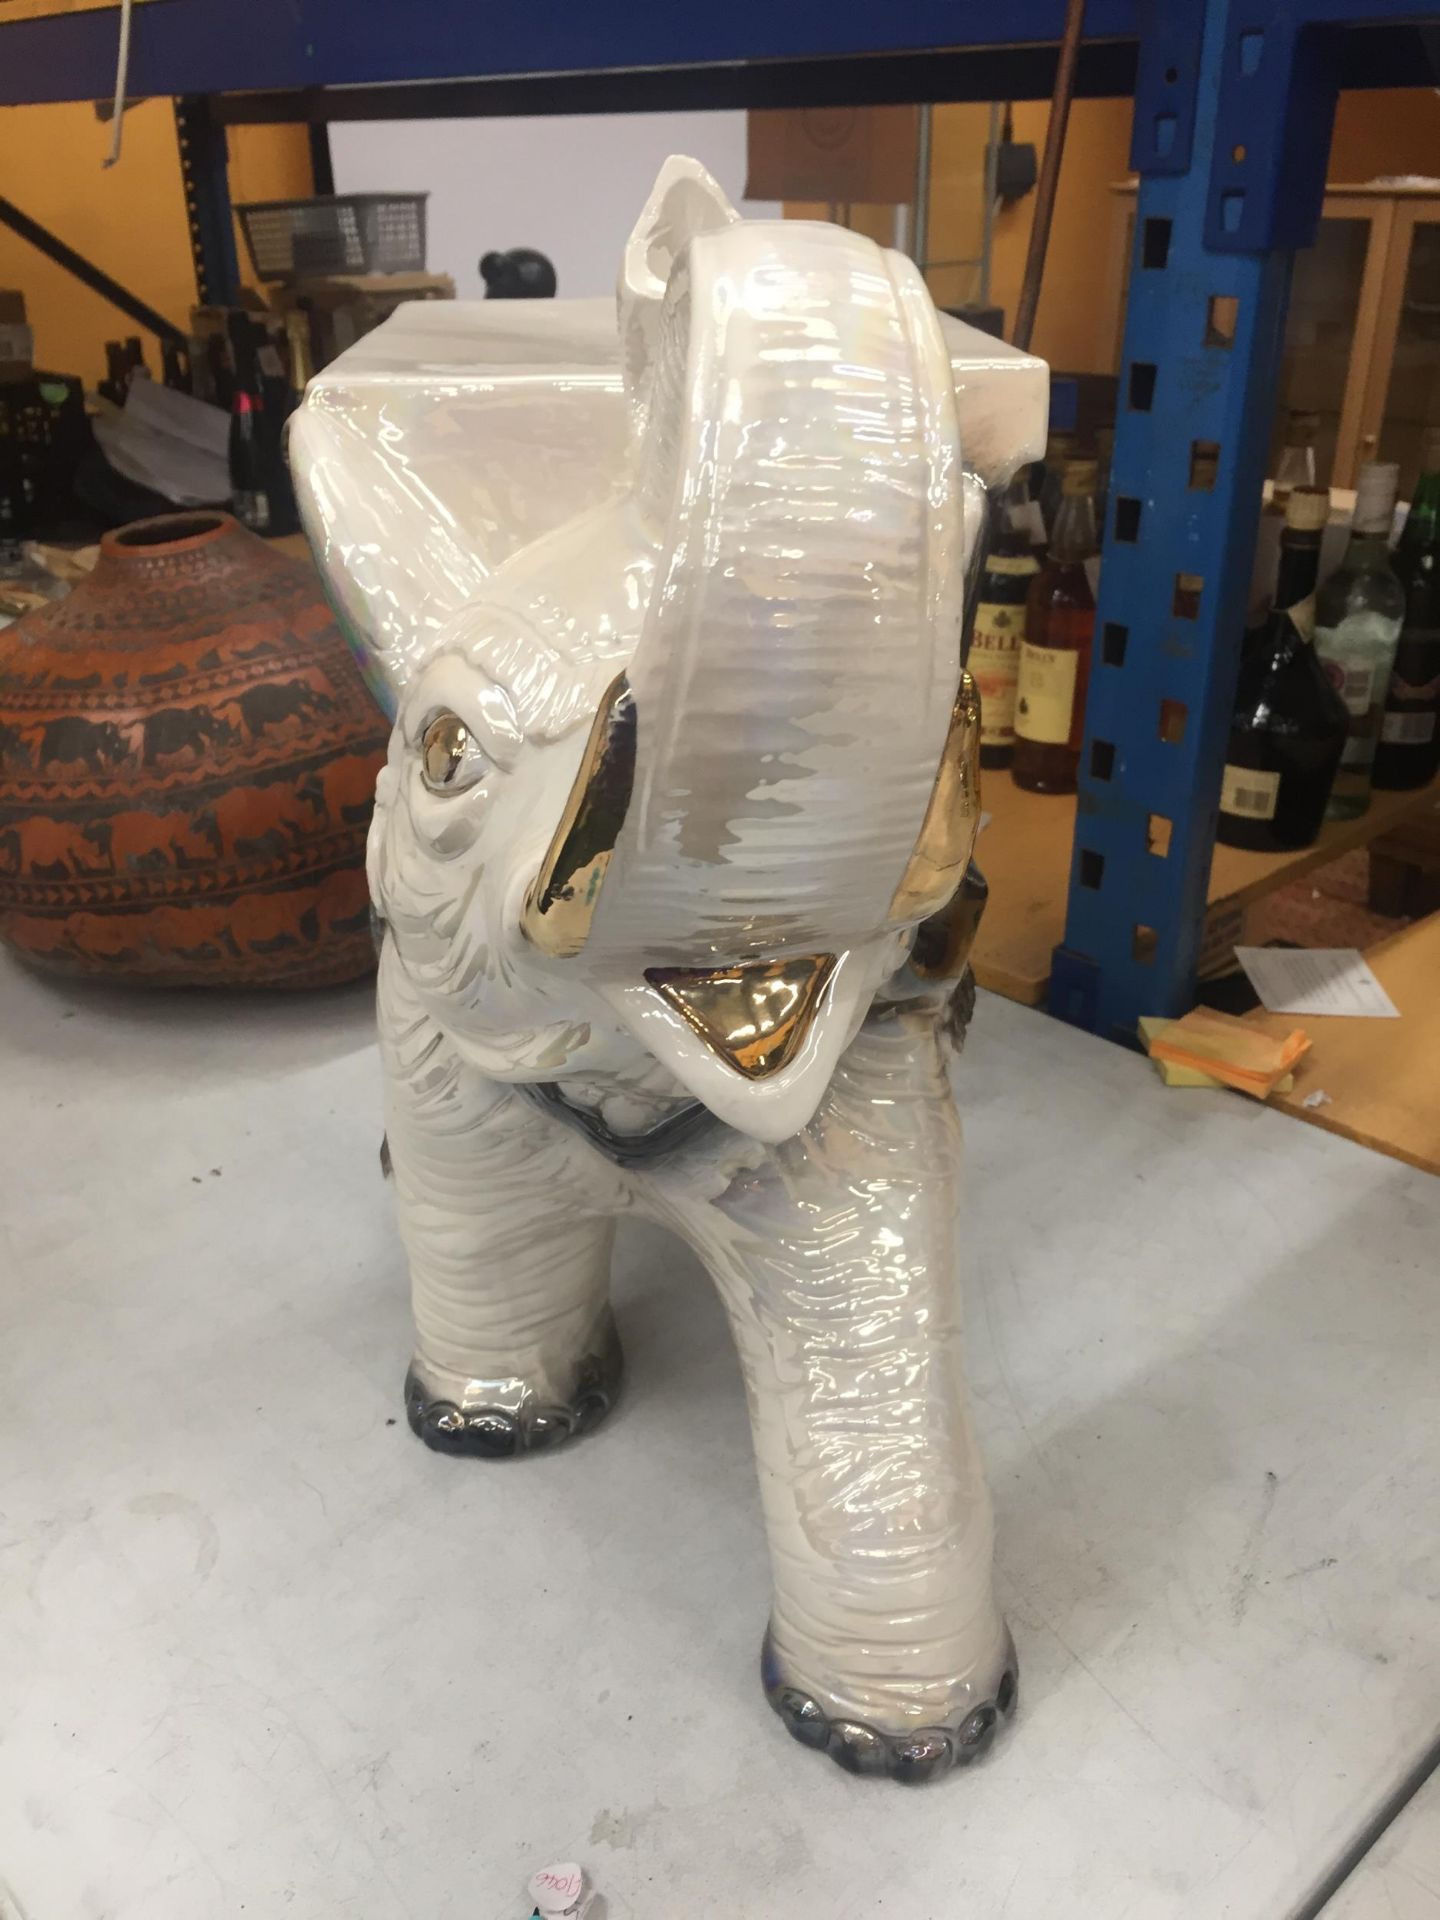 A DECORATIVE CERAMIC GARDEN ELEPHANT SEAT WITH PEARLESCENT DESIGN AND GILT HIGHLIGHTS, HEIGHT 48CM - Image 2 of 4